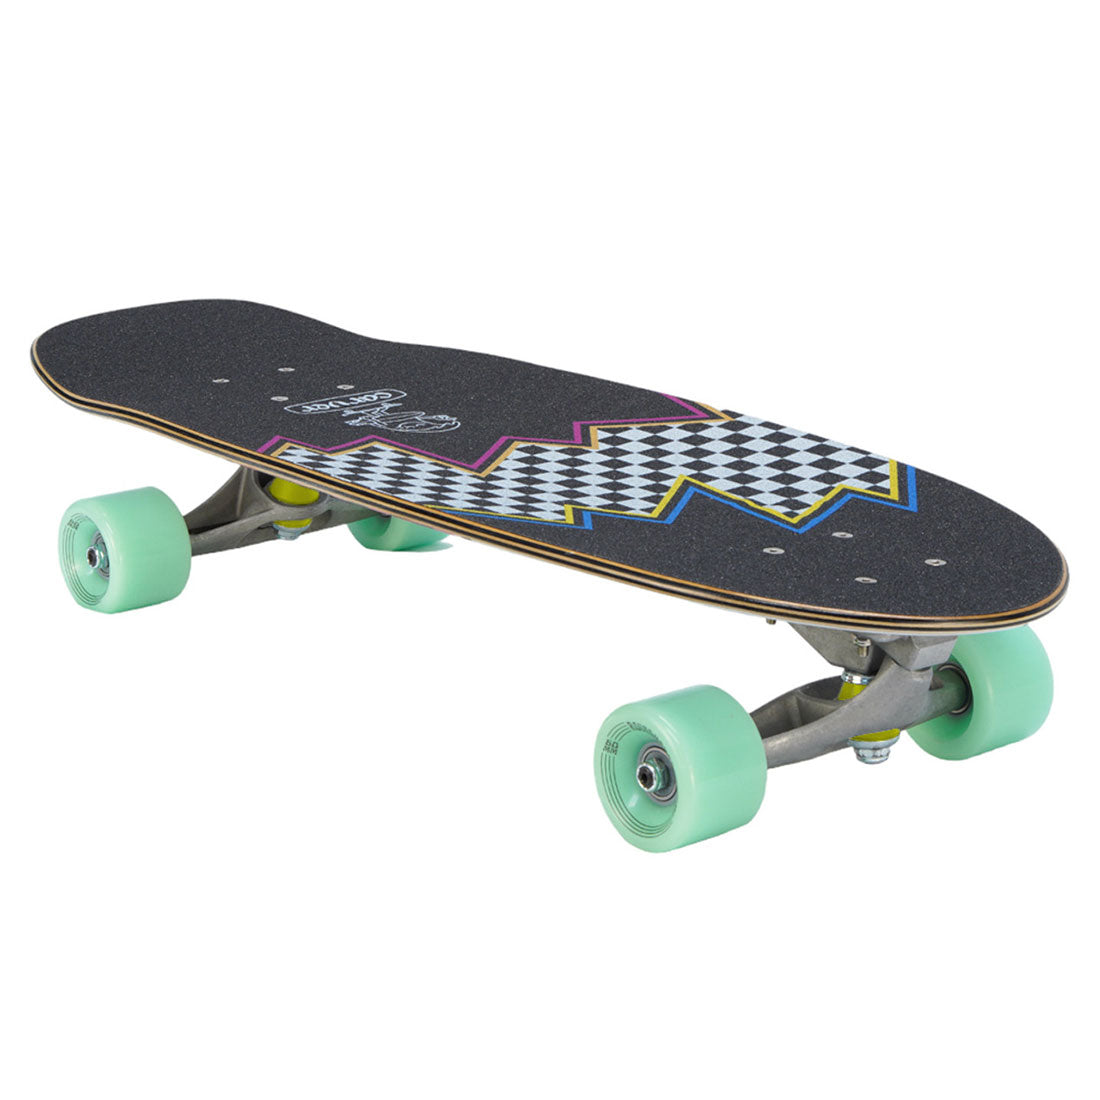 Carver Lazer Fazer 26 C5 Mini Complete Skateboard Compl Carving and Specialty